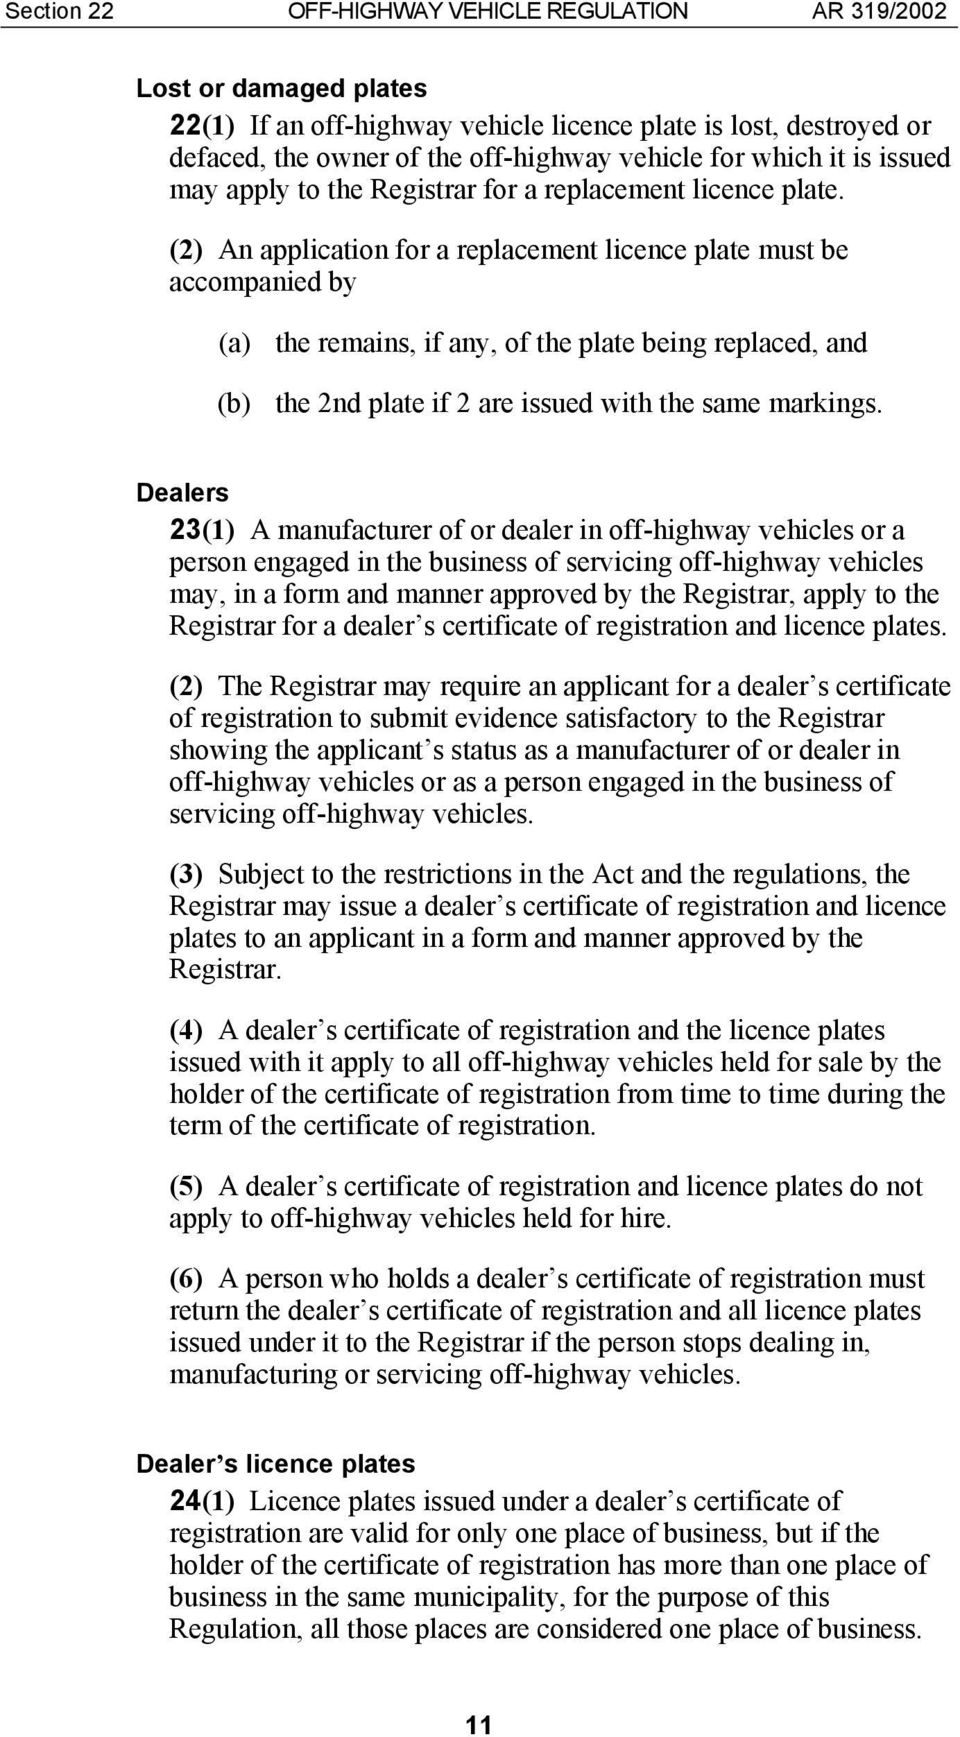 (2) An application for a replacement licence plate must be accompanied by (a) the remains, if any, of the plate being replaced, and (b) the 2nd plate if 2 are issued with the same markings.